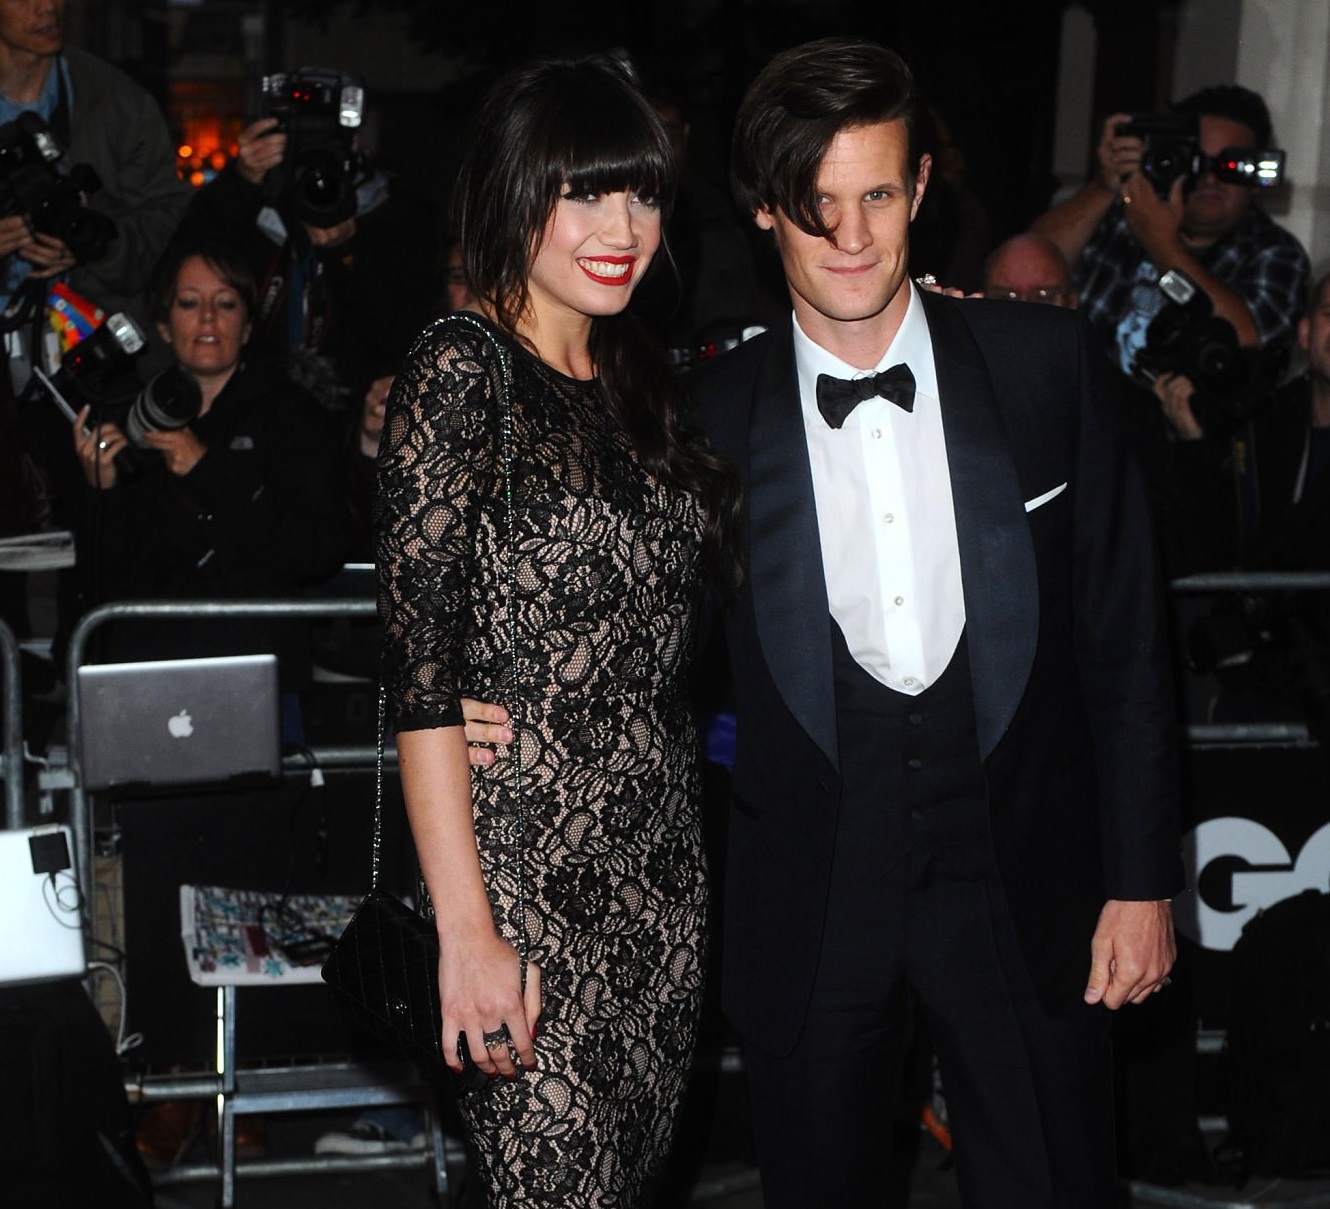 Daisy Lowe and Matt Smith attended the GQ Men Of The Year Awards in 2011.